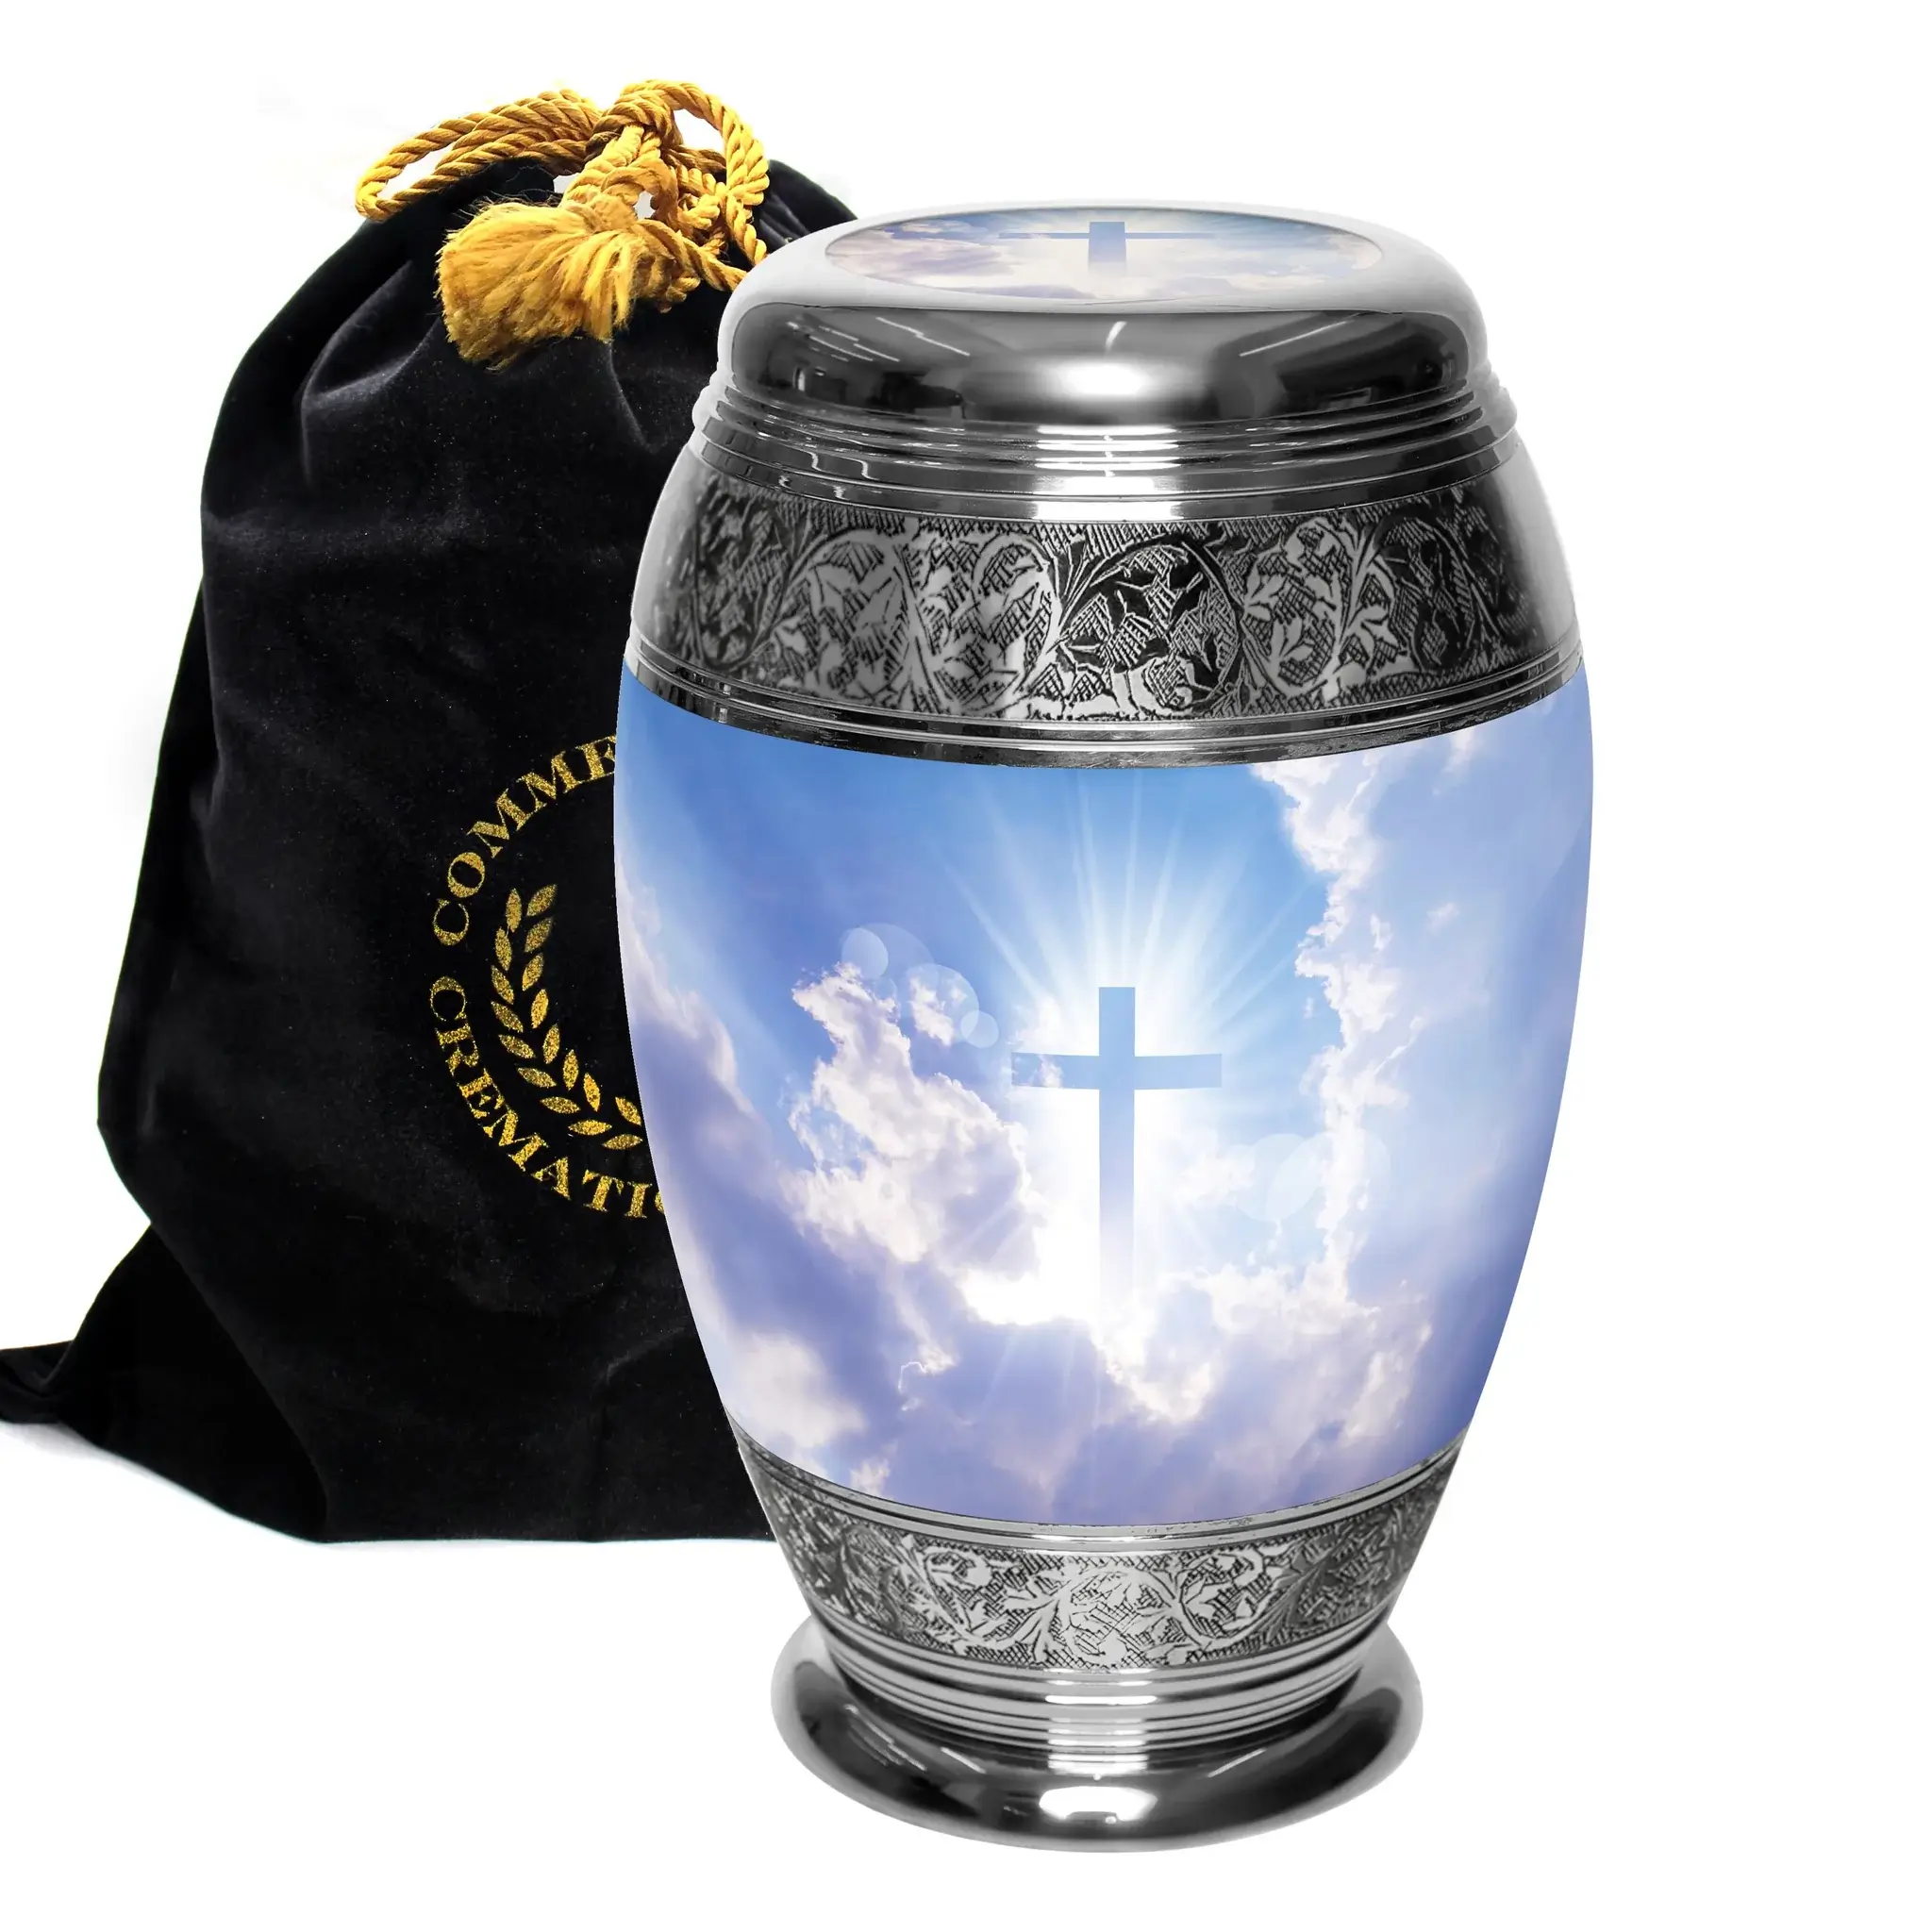 COMMEMORATIVE CREMATION Heavenly Cross Cremation Urns 